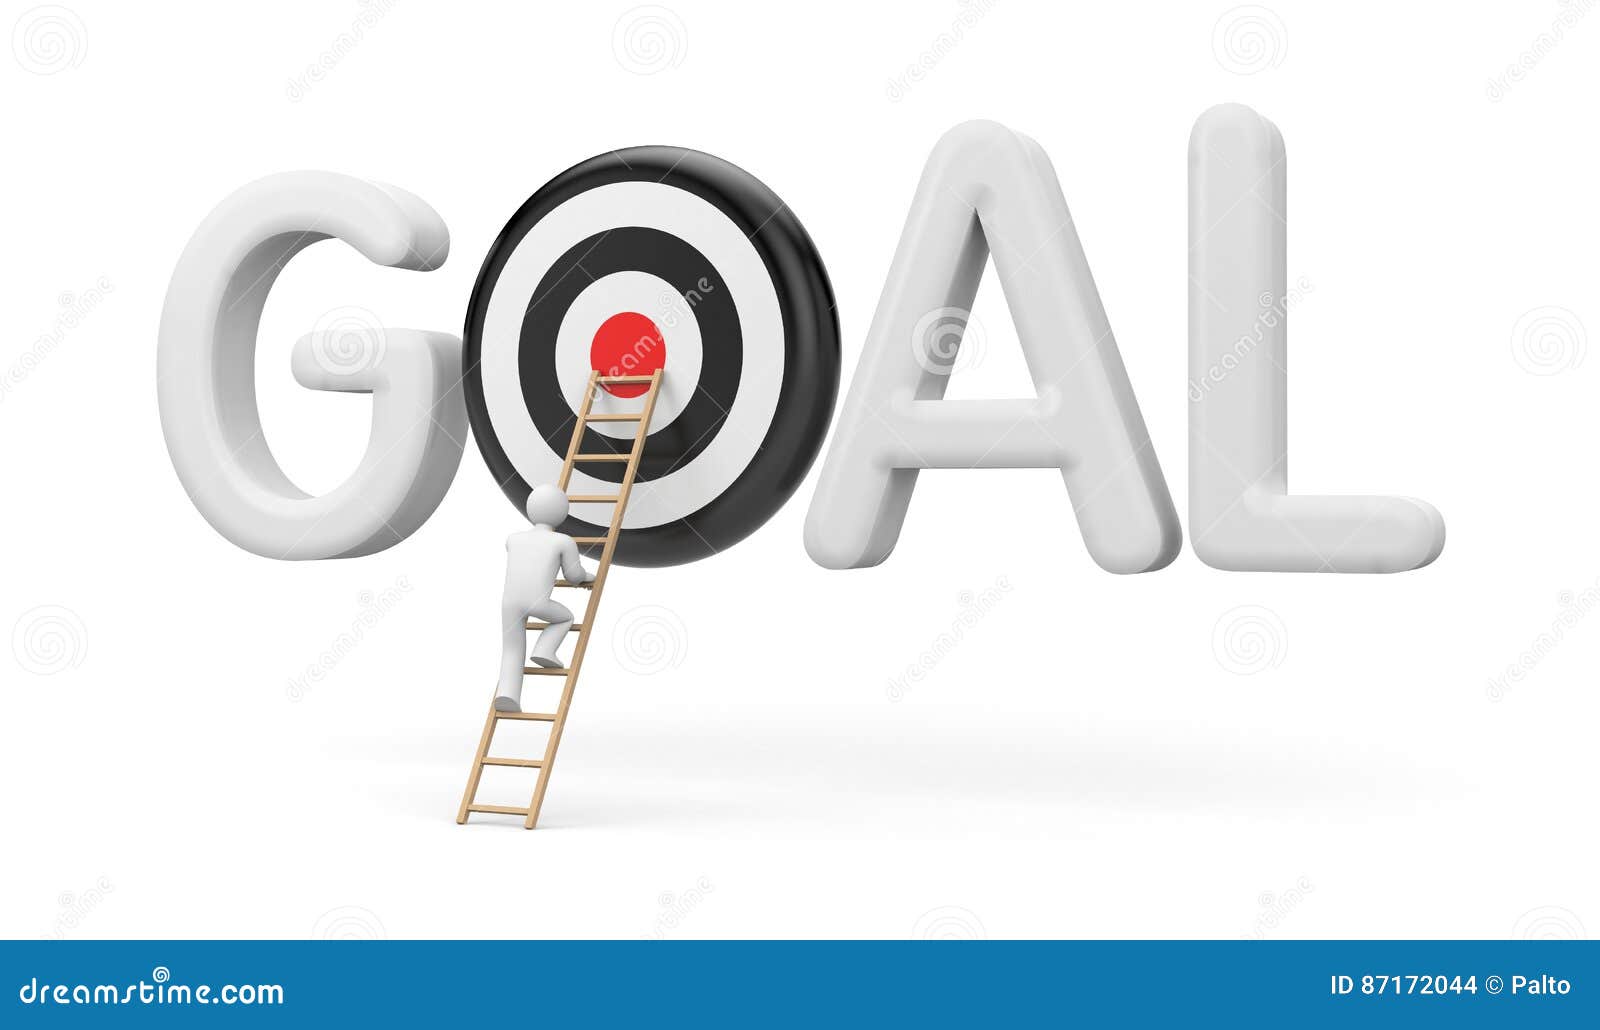 man climbs to the stairs to the target goals